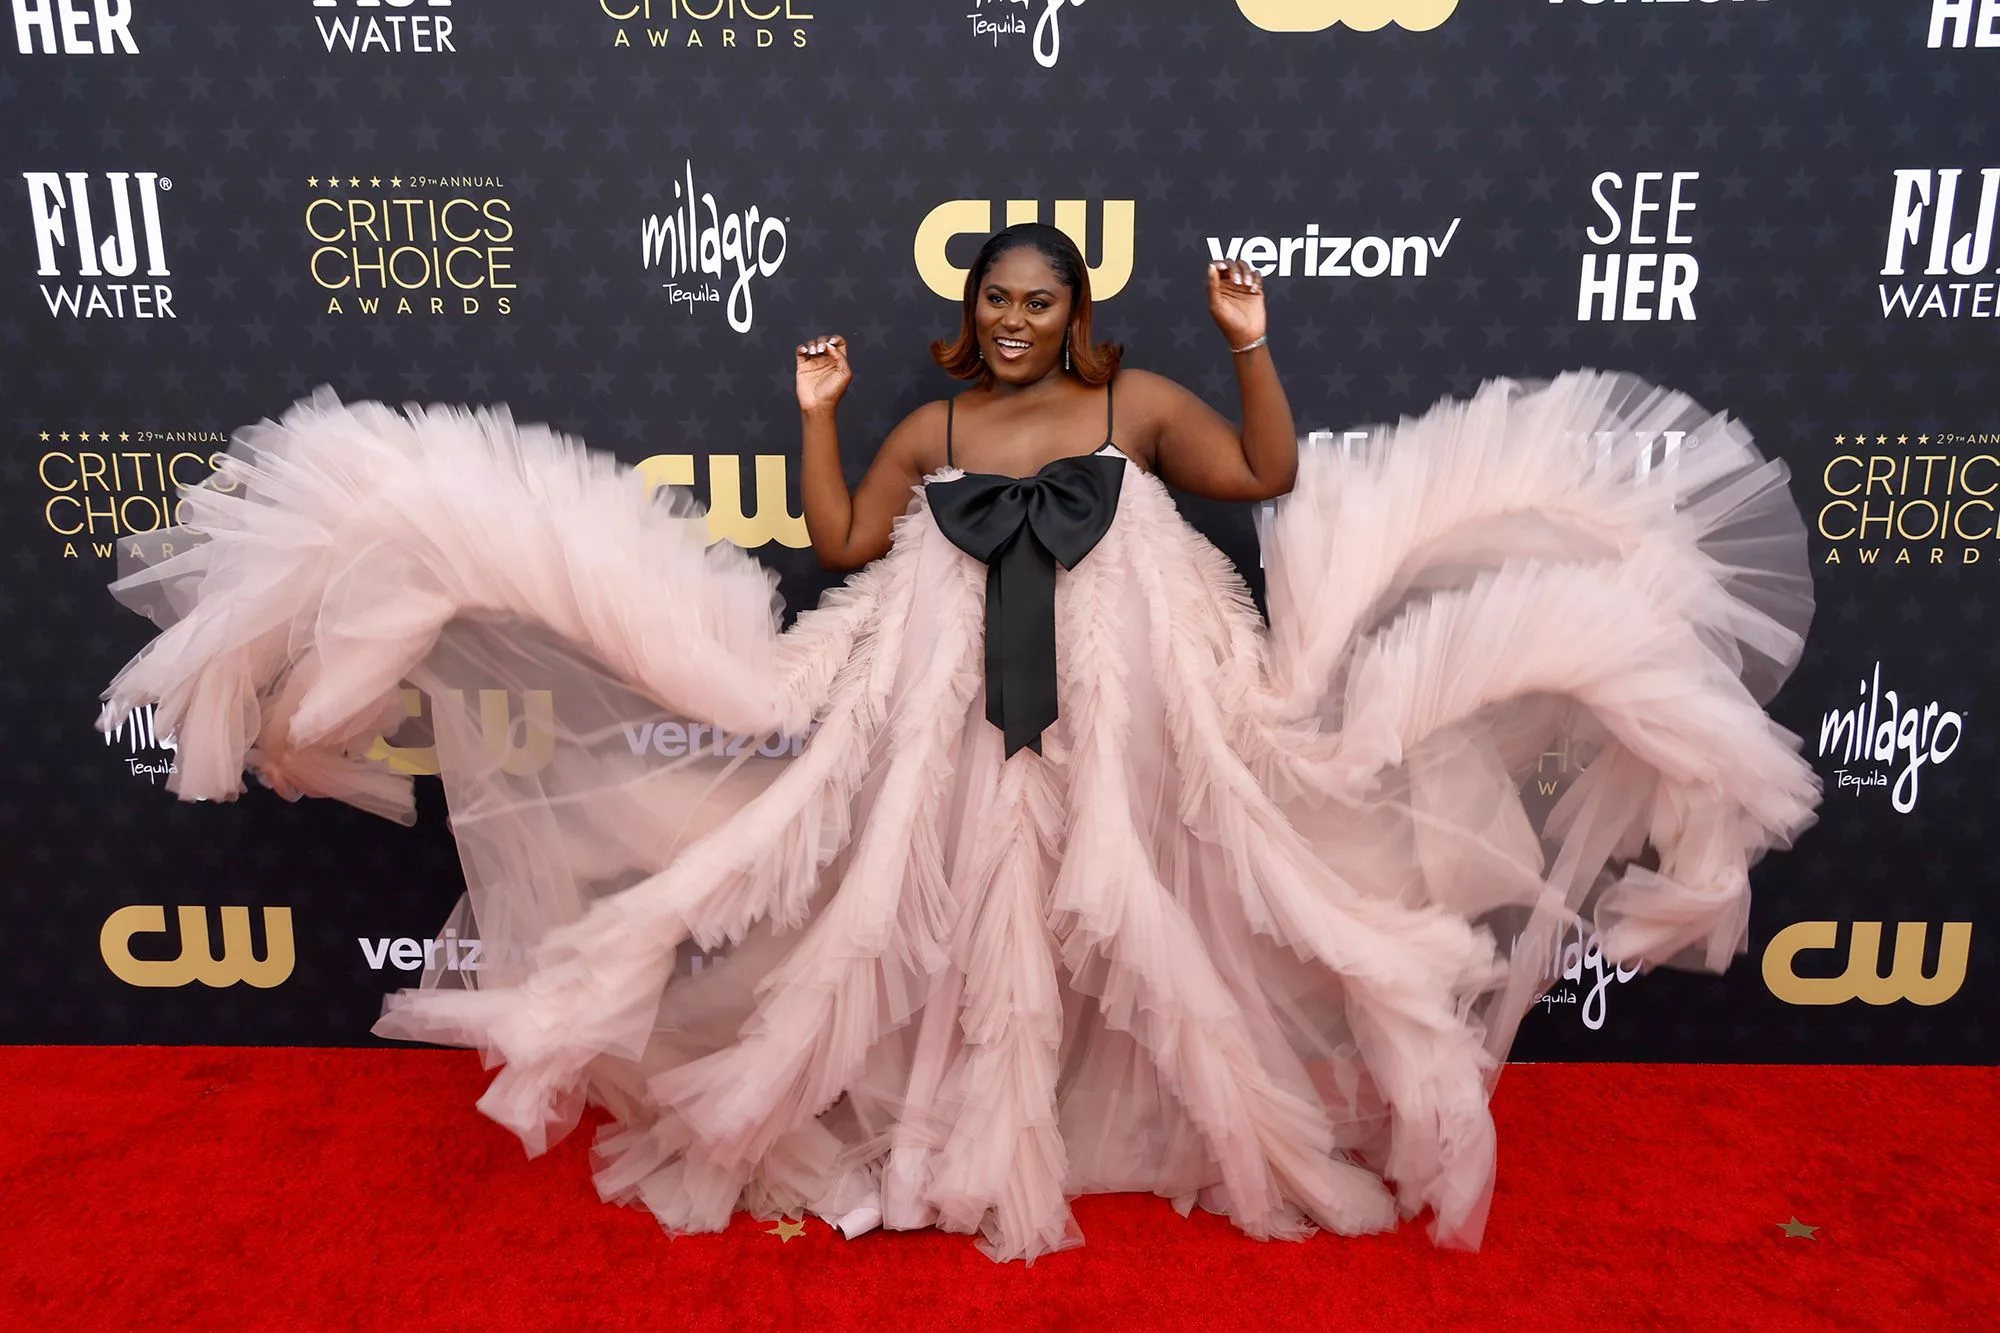 "The Color Purple" star Danielle Brooks wore a voluminous organza gown, by Monsoori, with a playful statement bow.